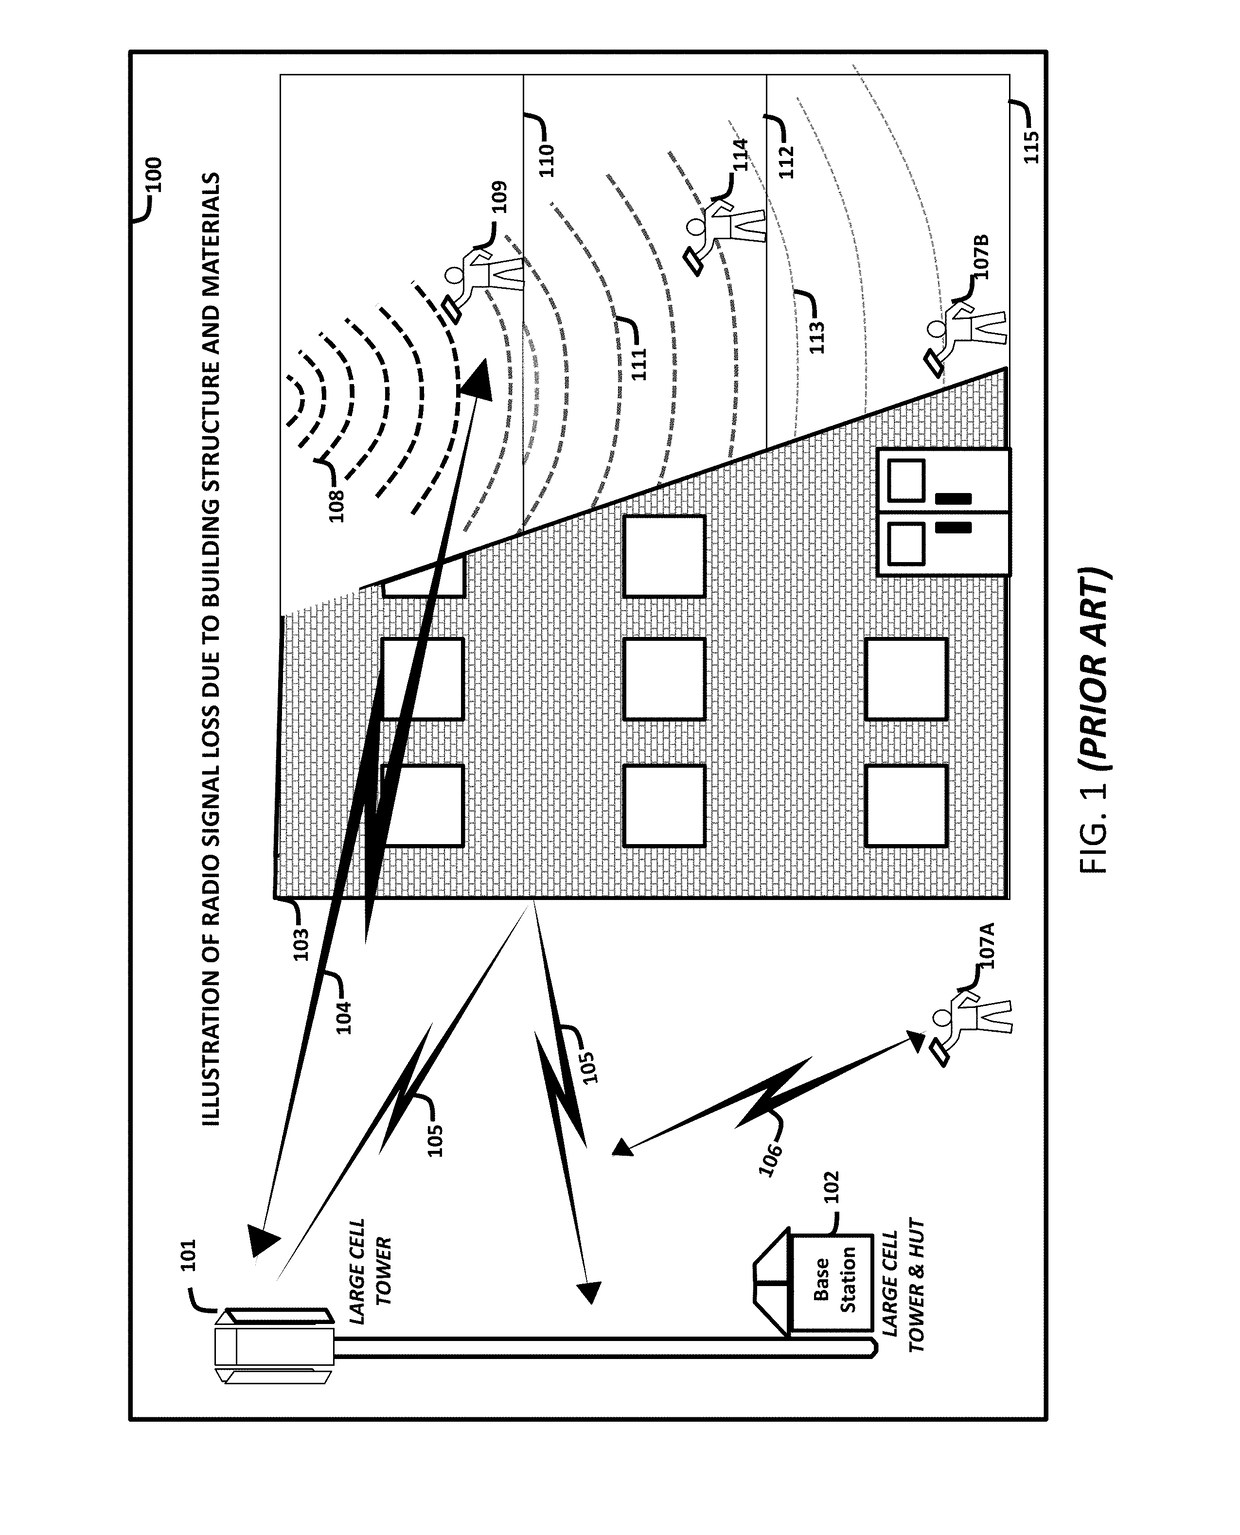 System, Network, Device and Stacked Spectrum Method for Implementing Spectrum Sharing of Multiple Contiguous and Non-Contiguous Spectrum Bands Utilizing Universal Wireless Access Gateways to Enable Dynamic Security and Bandwidth Policy Management